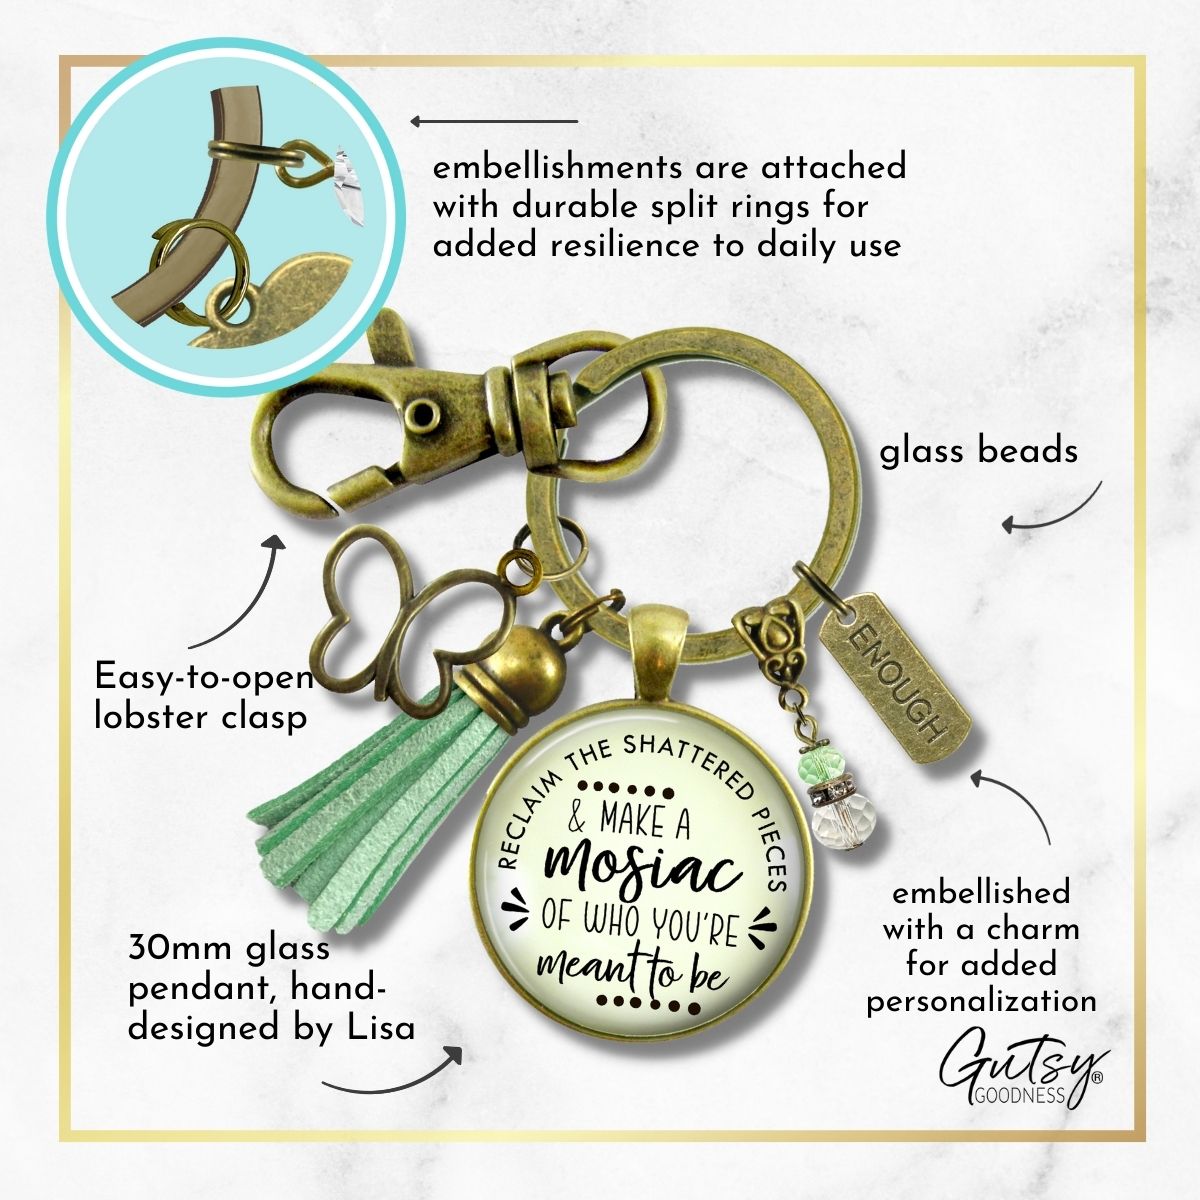 Handmade Gutsy Goodness Jewelry Reclaim The Shattered Pieces Make Mosaic Keychain Inspiring Jewelry Enough & Tassel Charm & Message Card